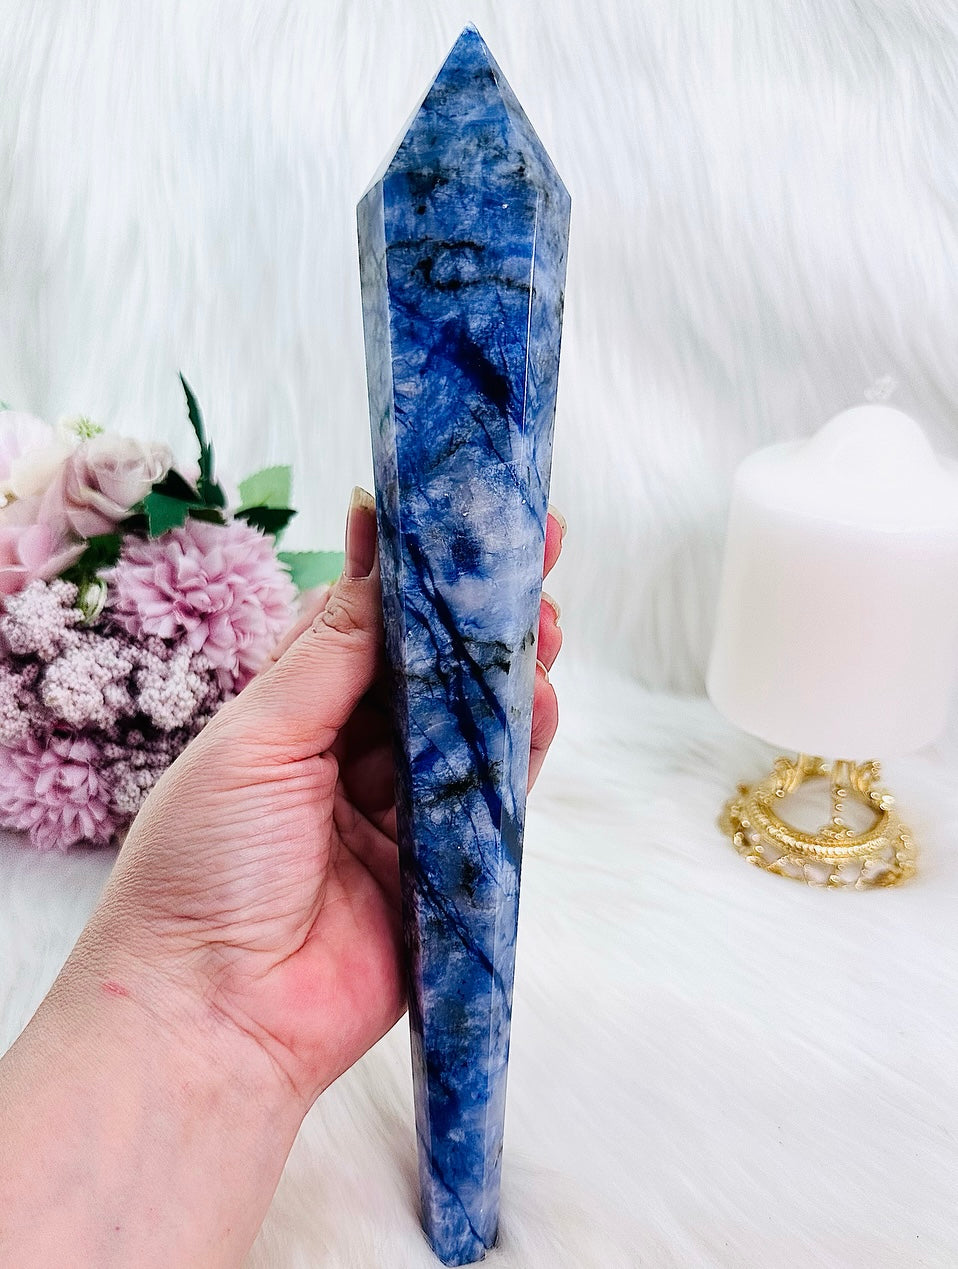 Classy & Absolutely Fabulous Huge 33cm Blue Sodalite Tower | Wand On Gold Stand